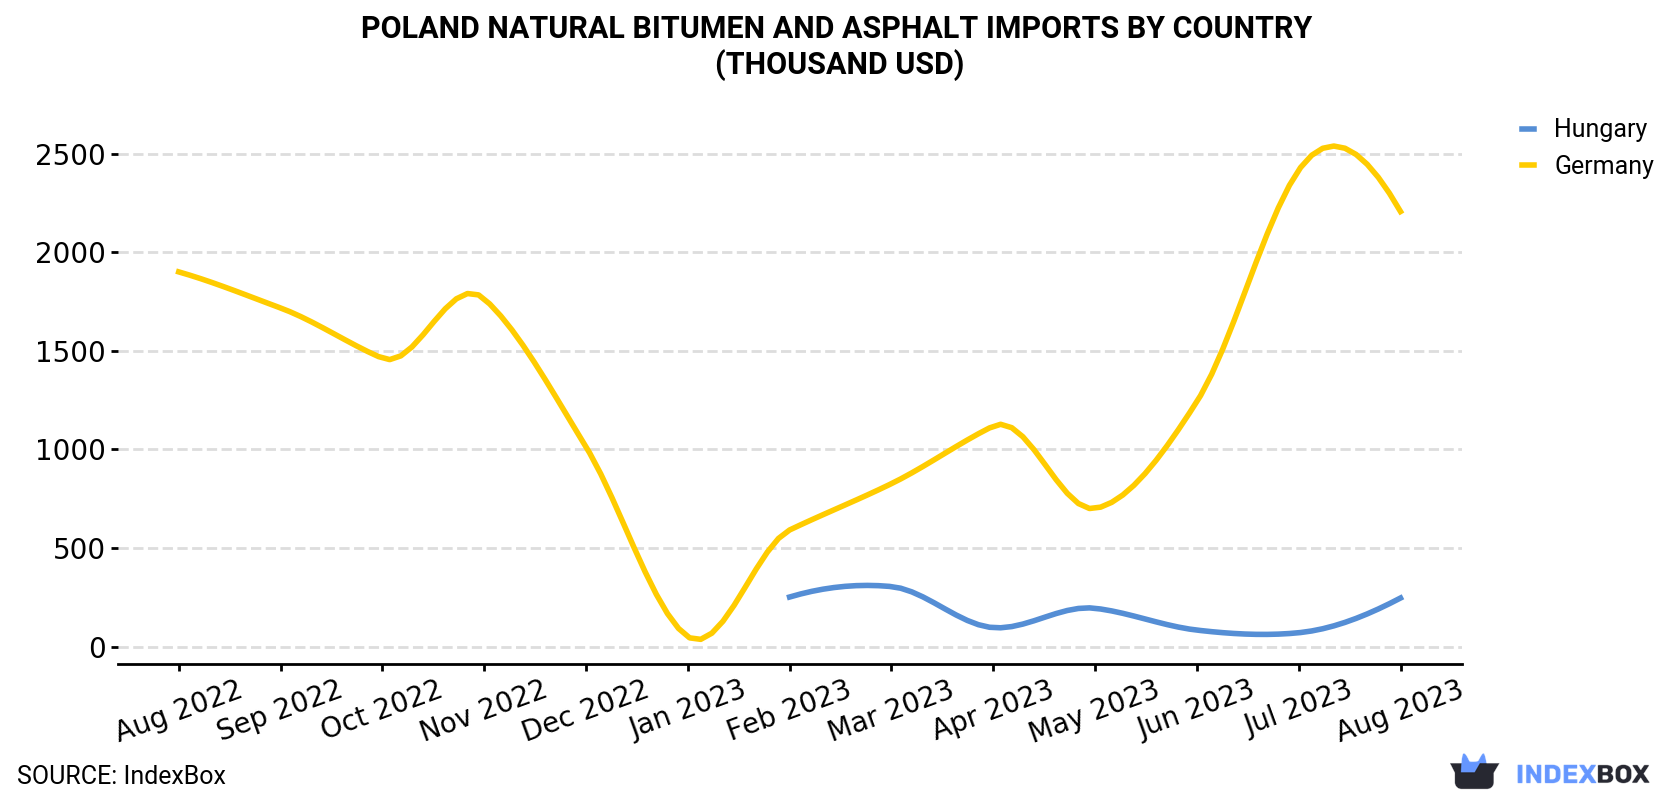 Poland Natural Bitumen and Asphalt Imports By Country (Thousand USD)